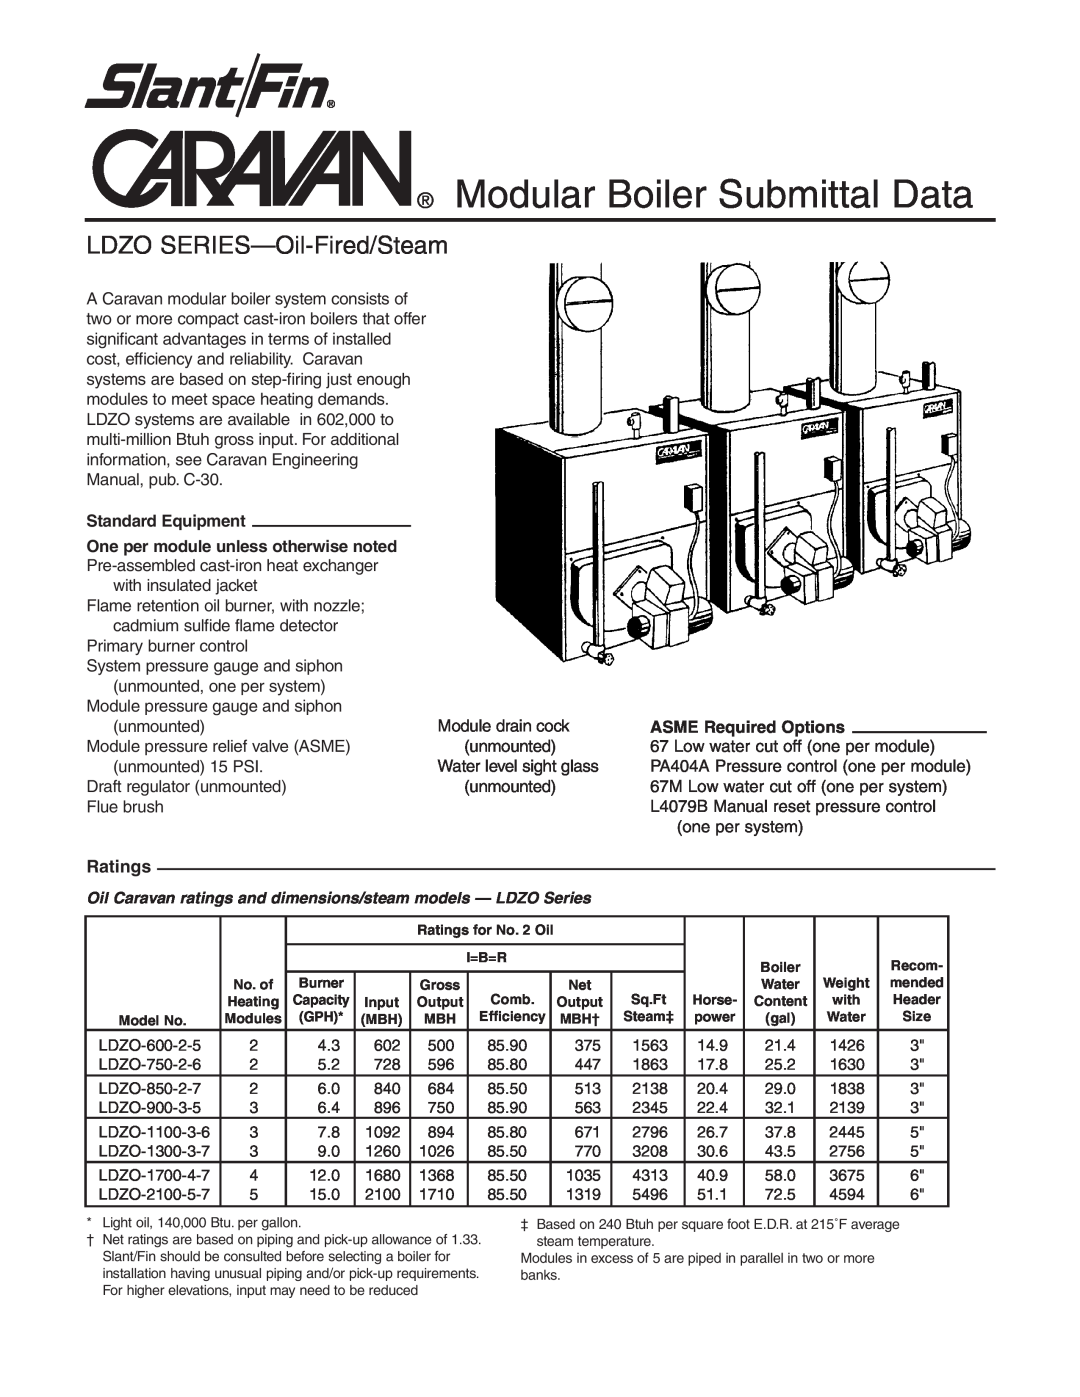 Slant/Fin LDZO Series dimensions ASME Required Options, Ratings, Modular Boiler Submittal Data 